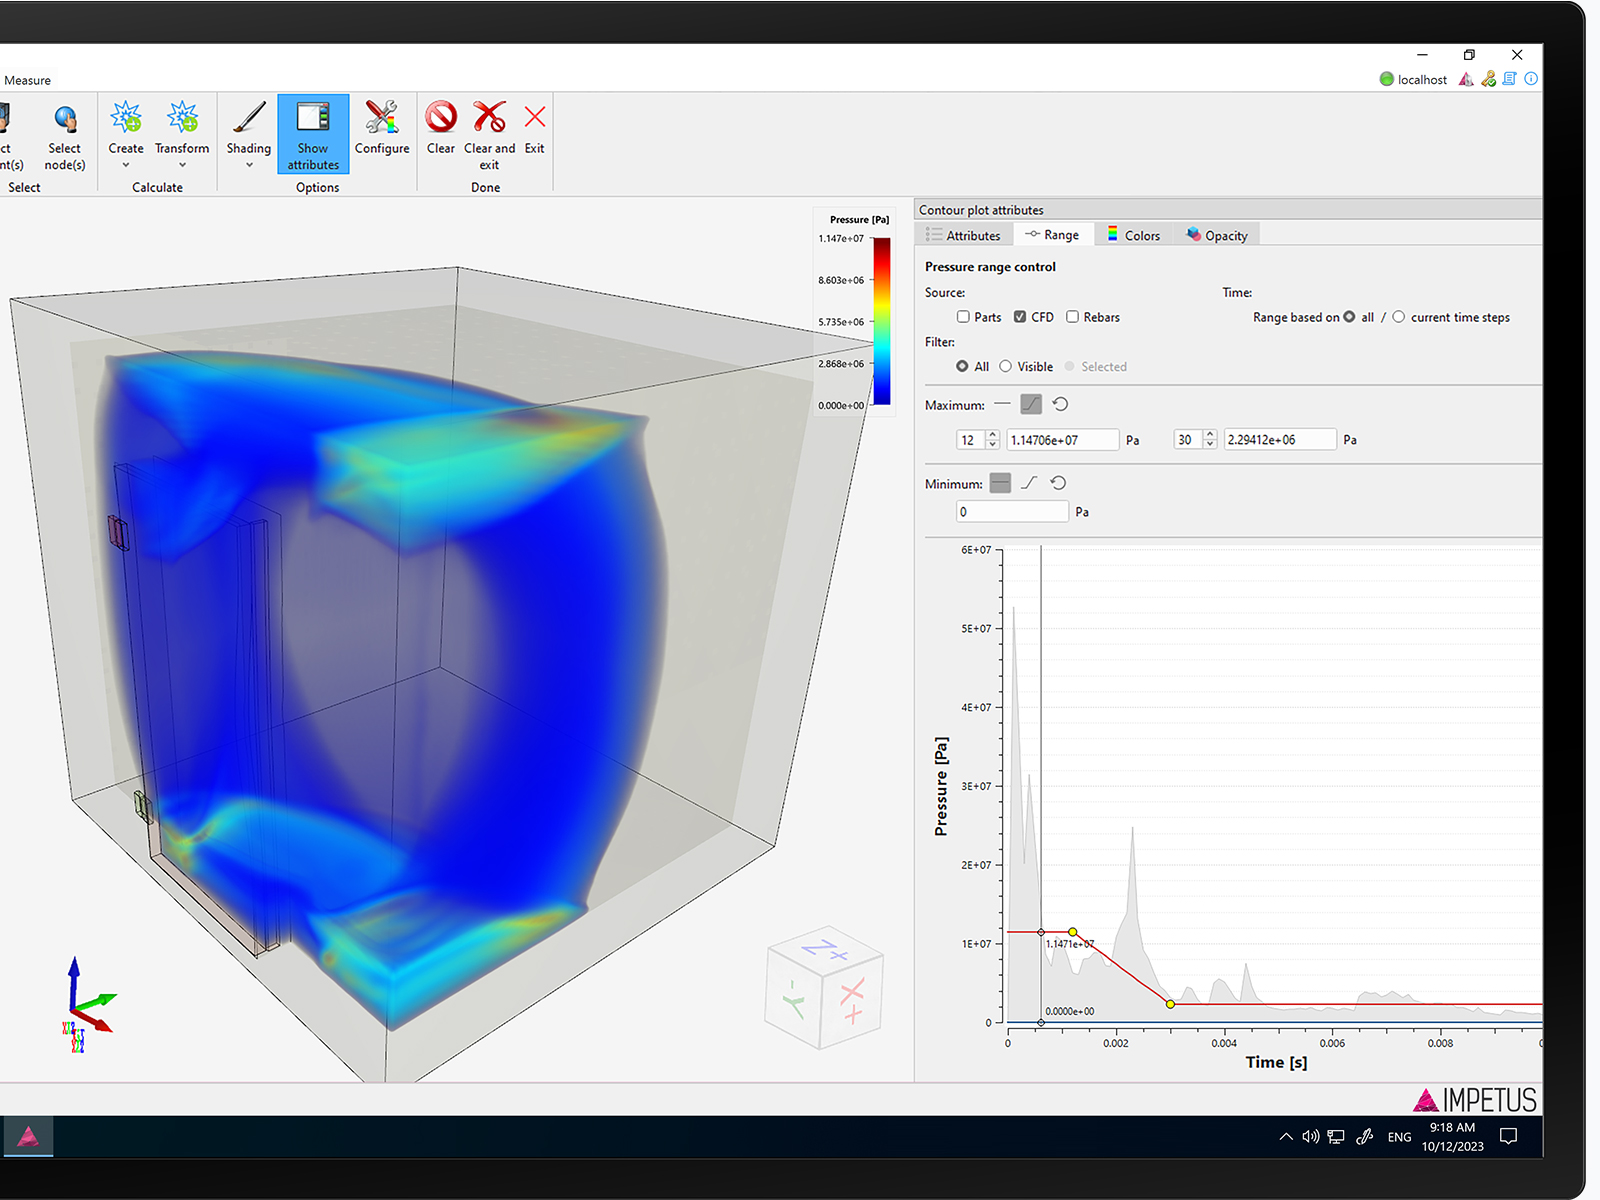 Advanced contour plot functionality combined with CFD simulation output